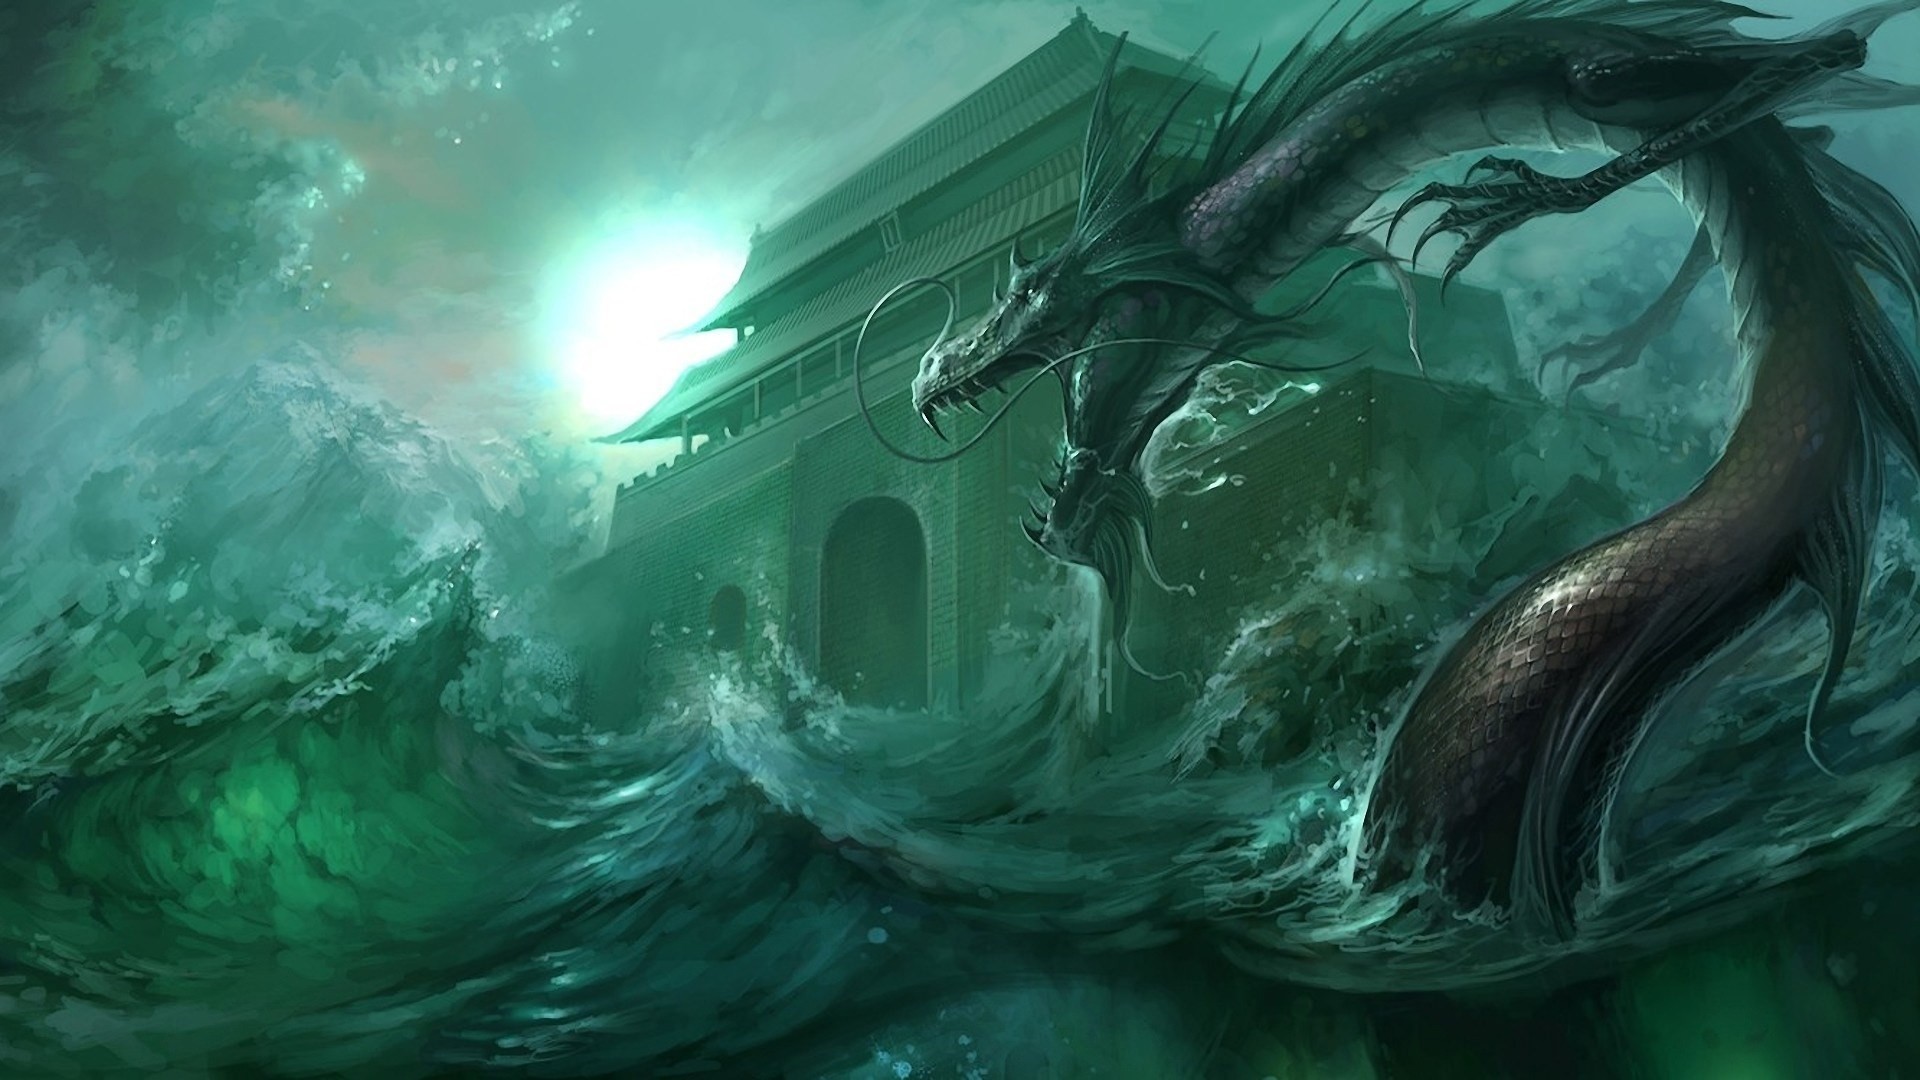 1920x1080 sea monster wallpapers 1080p high quality by Slade Peacock (2017-03-07)